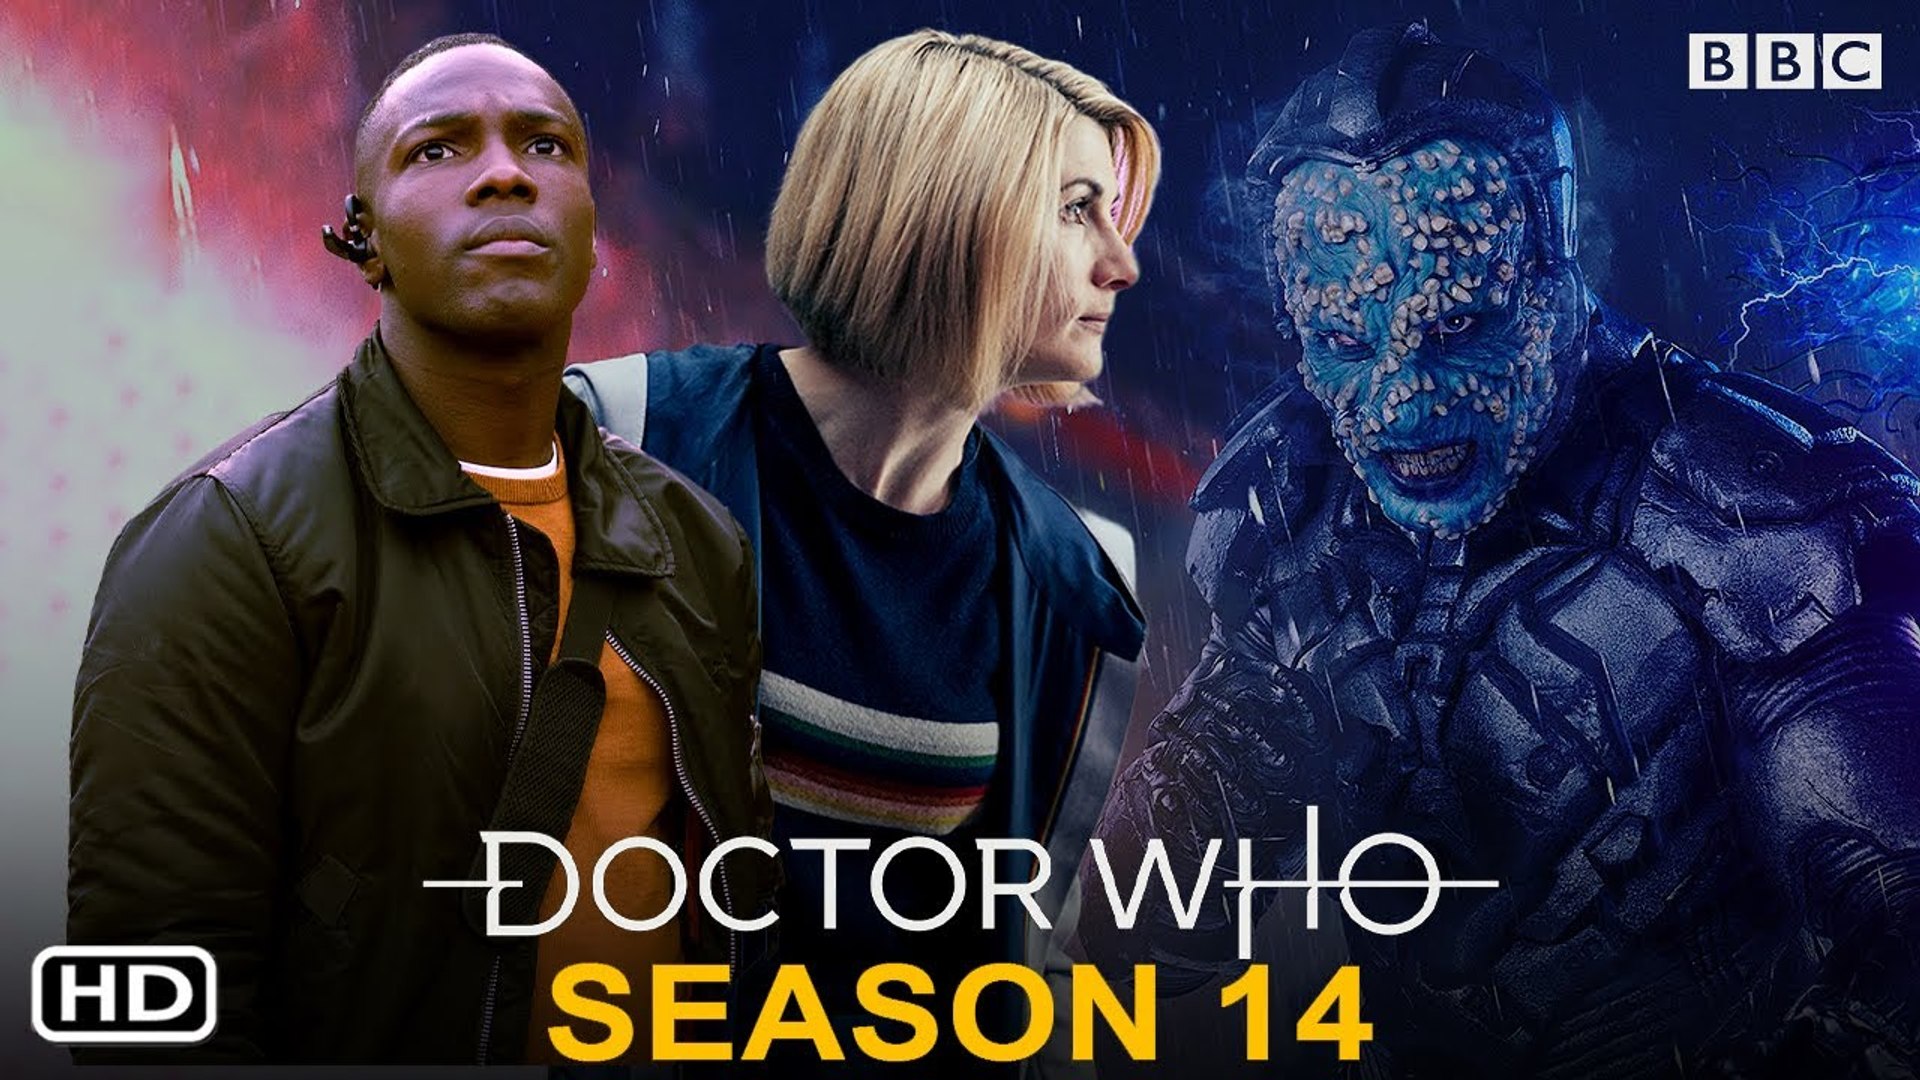 New Adventures Await Ncuti Gatwa Embarks on Time-Traveling Journey in Doctor Who Season 14 Premiere------